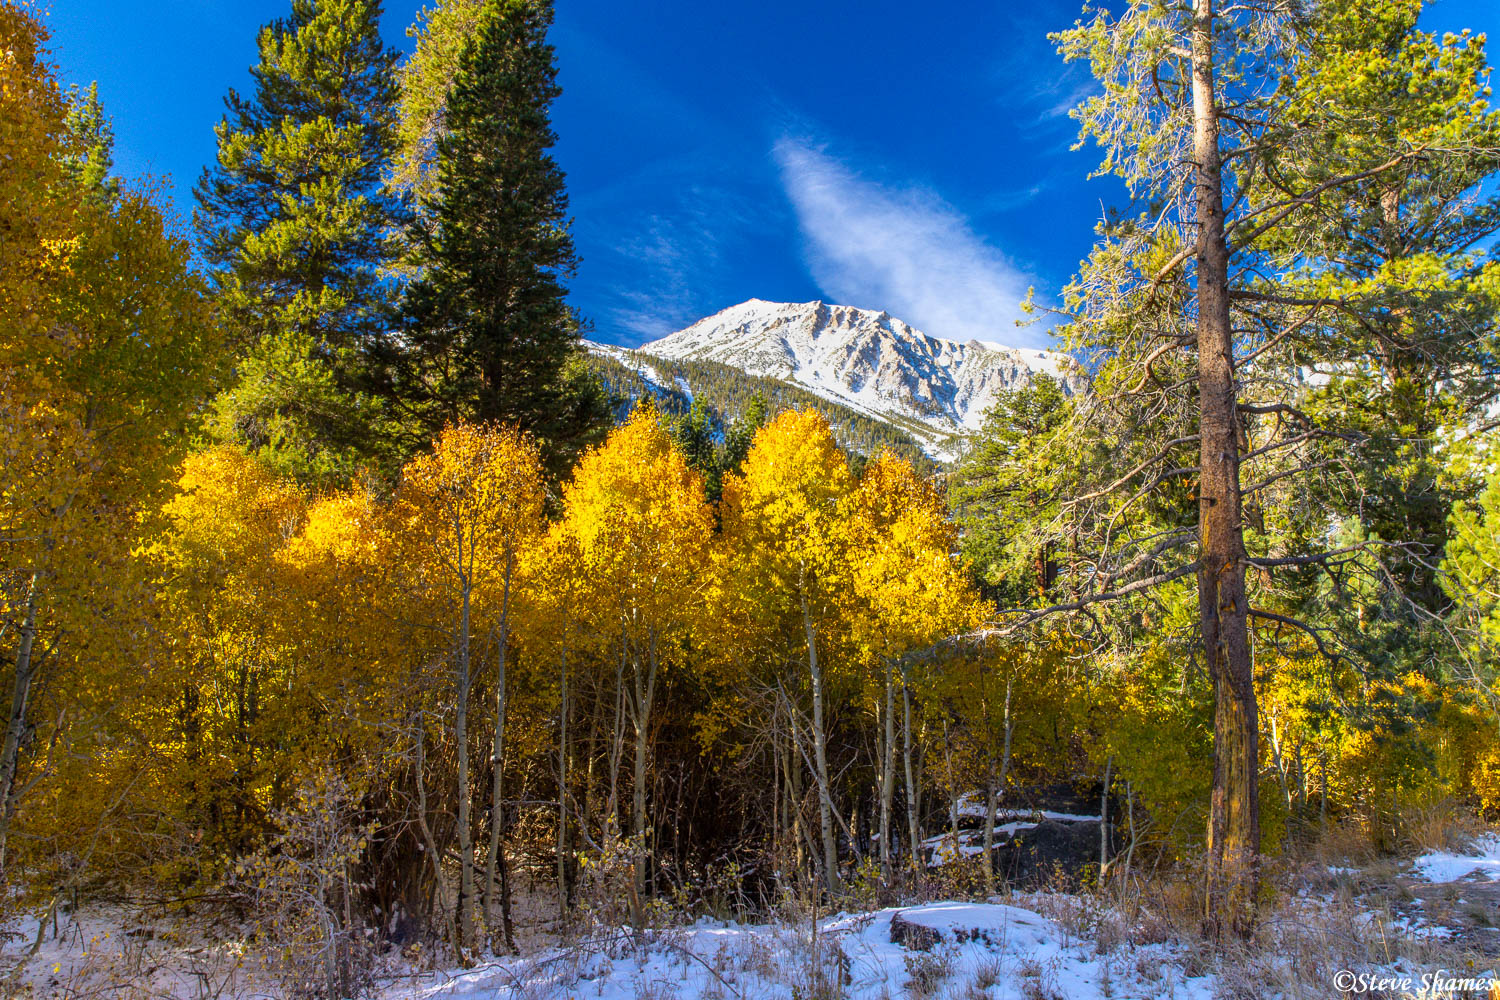 Another fall colors and mountains scene along the road to Tioga Pass.